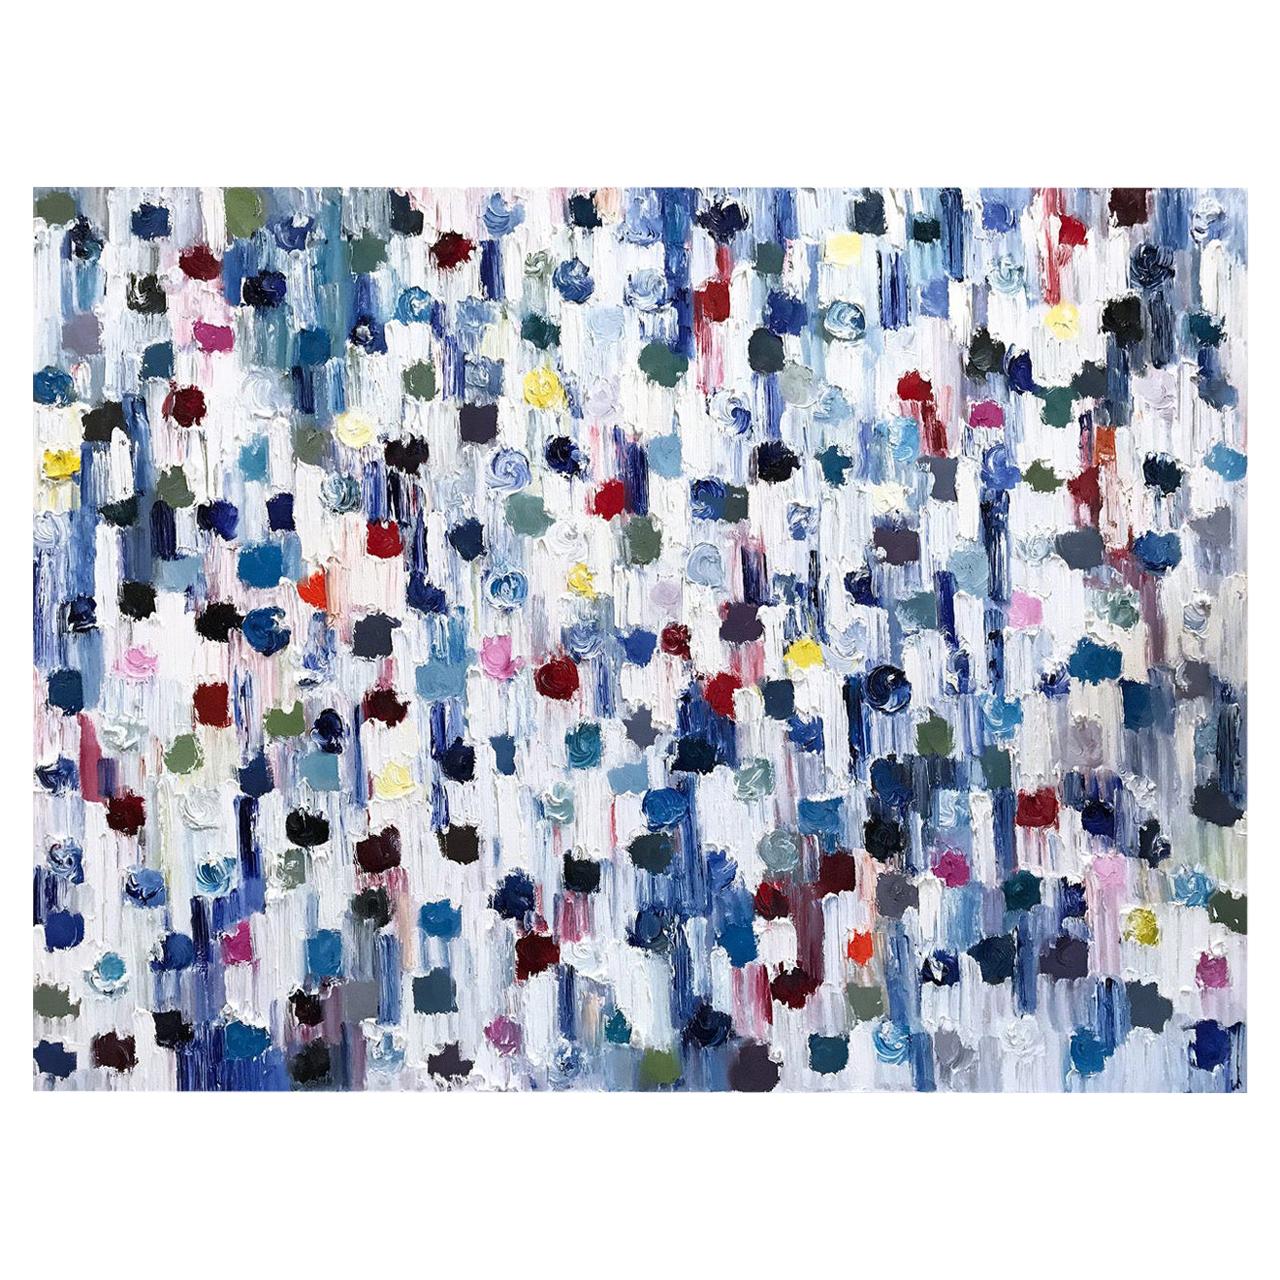 "Dripping Dots-St. Lucia" 2018 Oil on Canvas by Cindy Shaoul